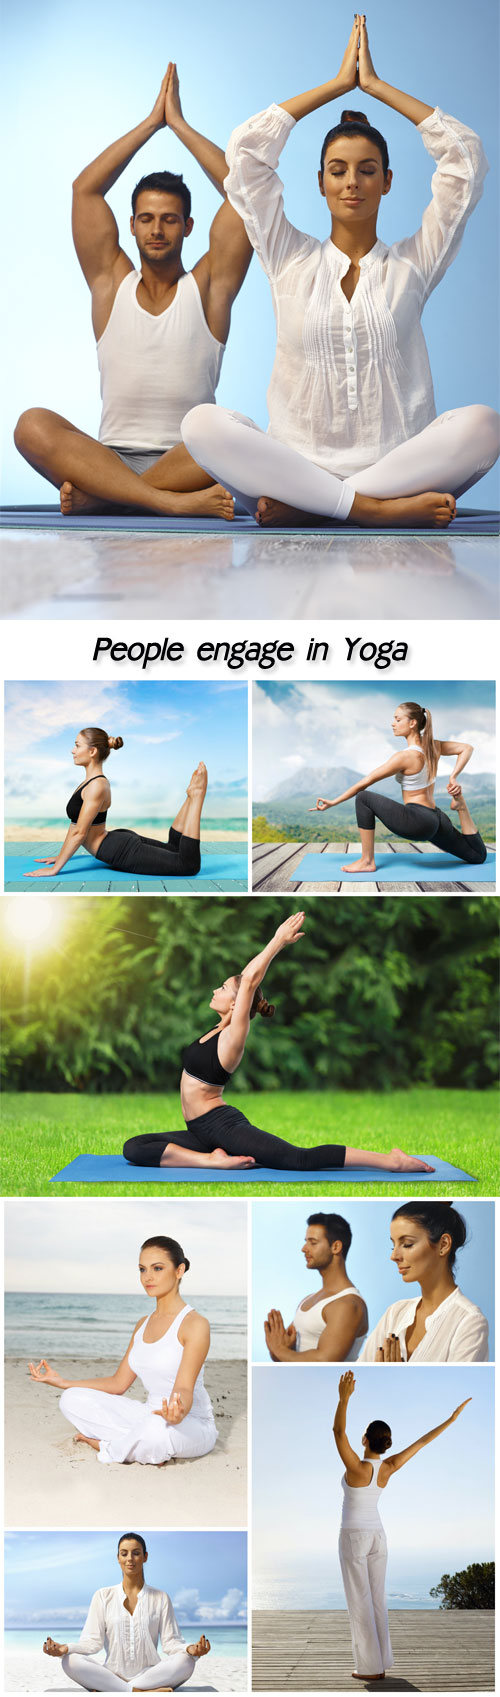 Young people engage in Yoga